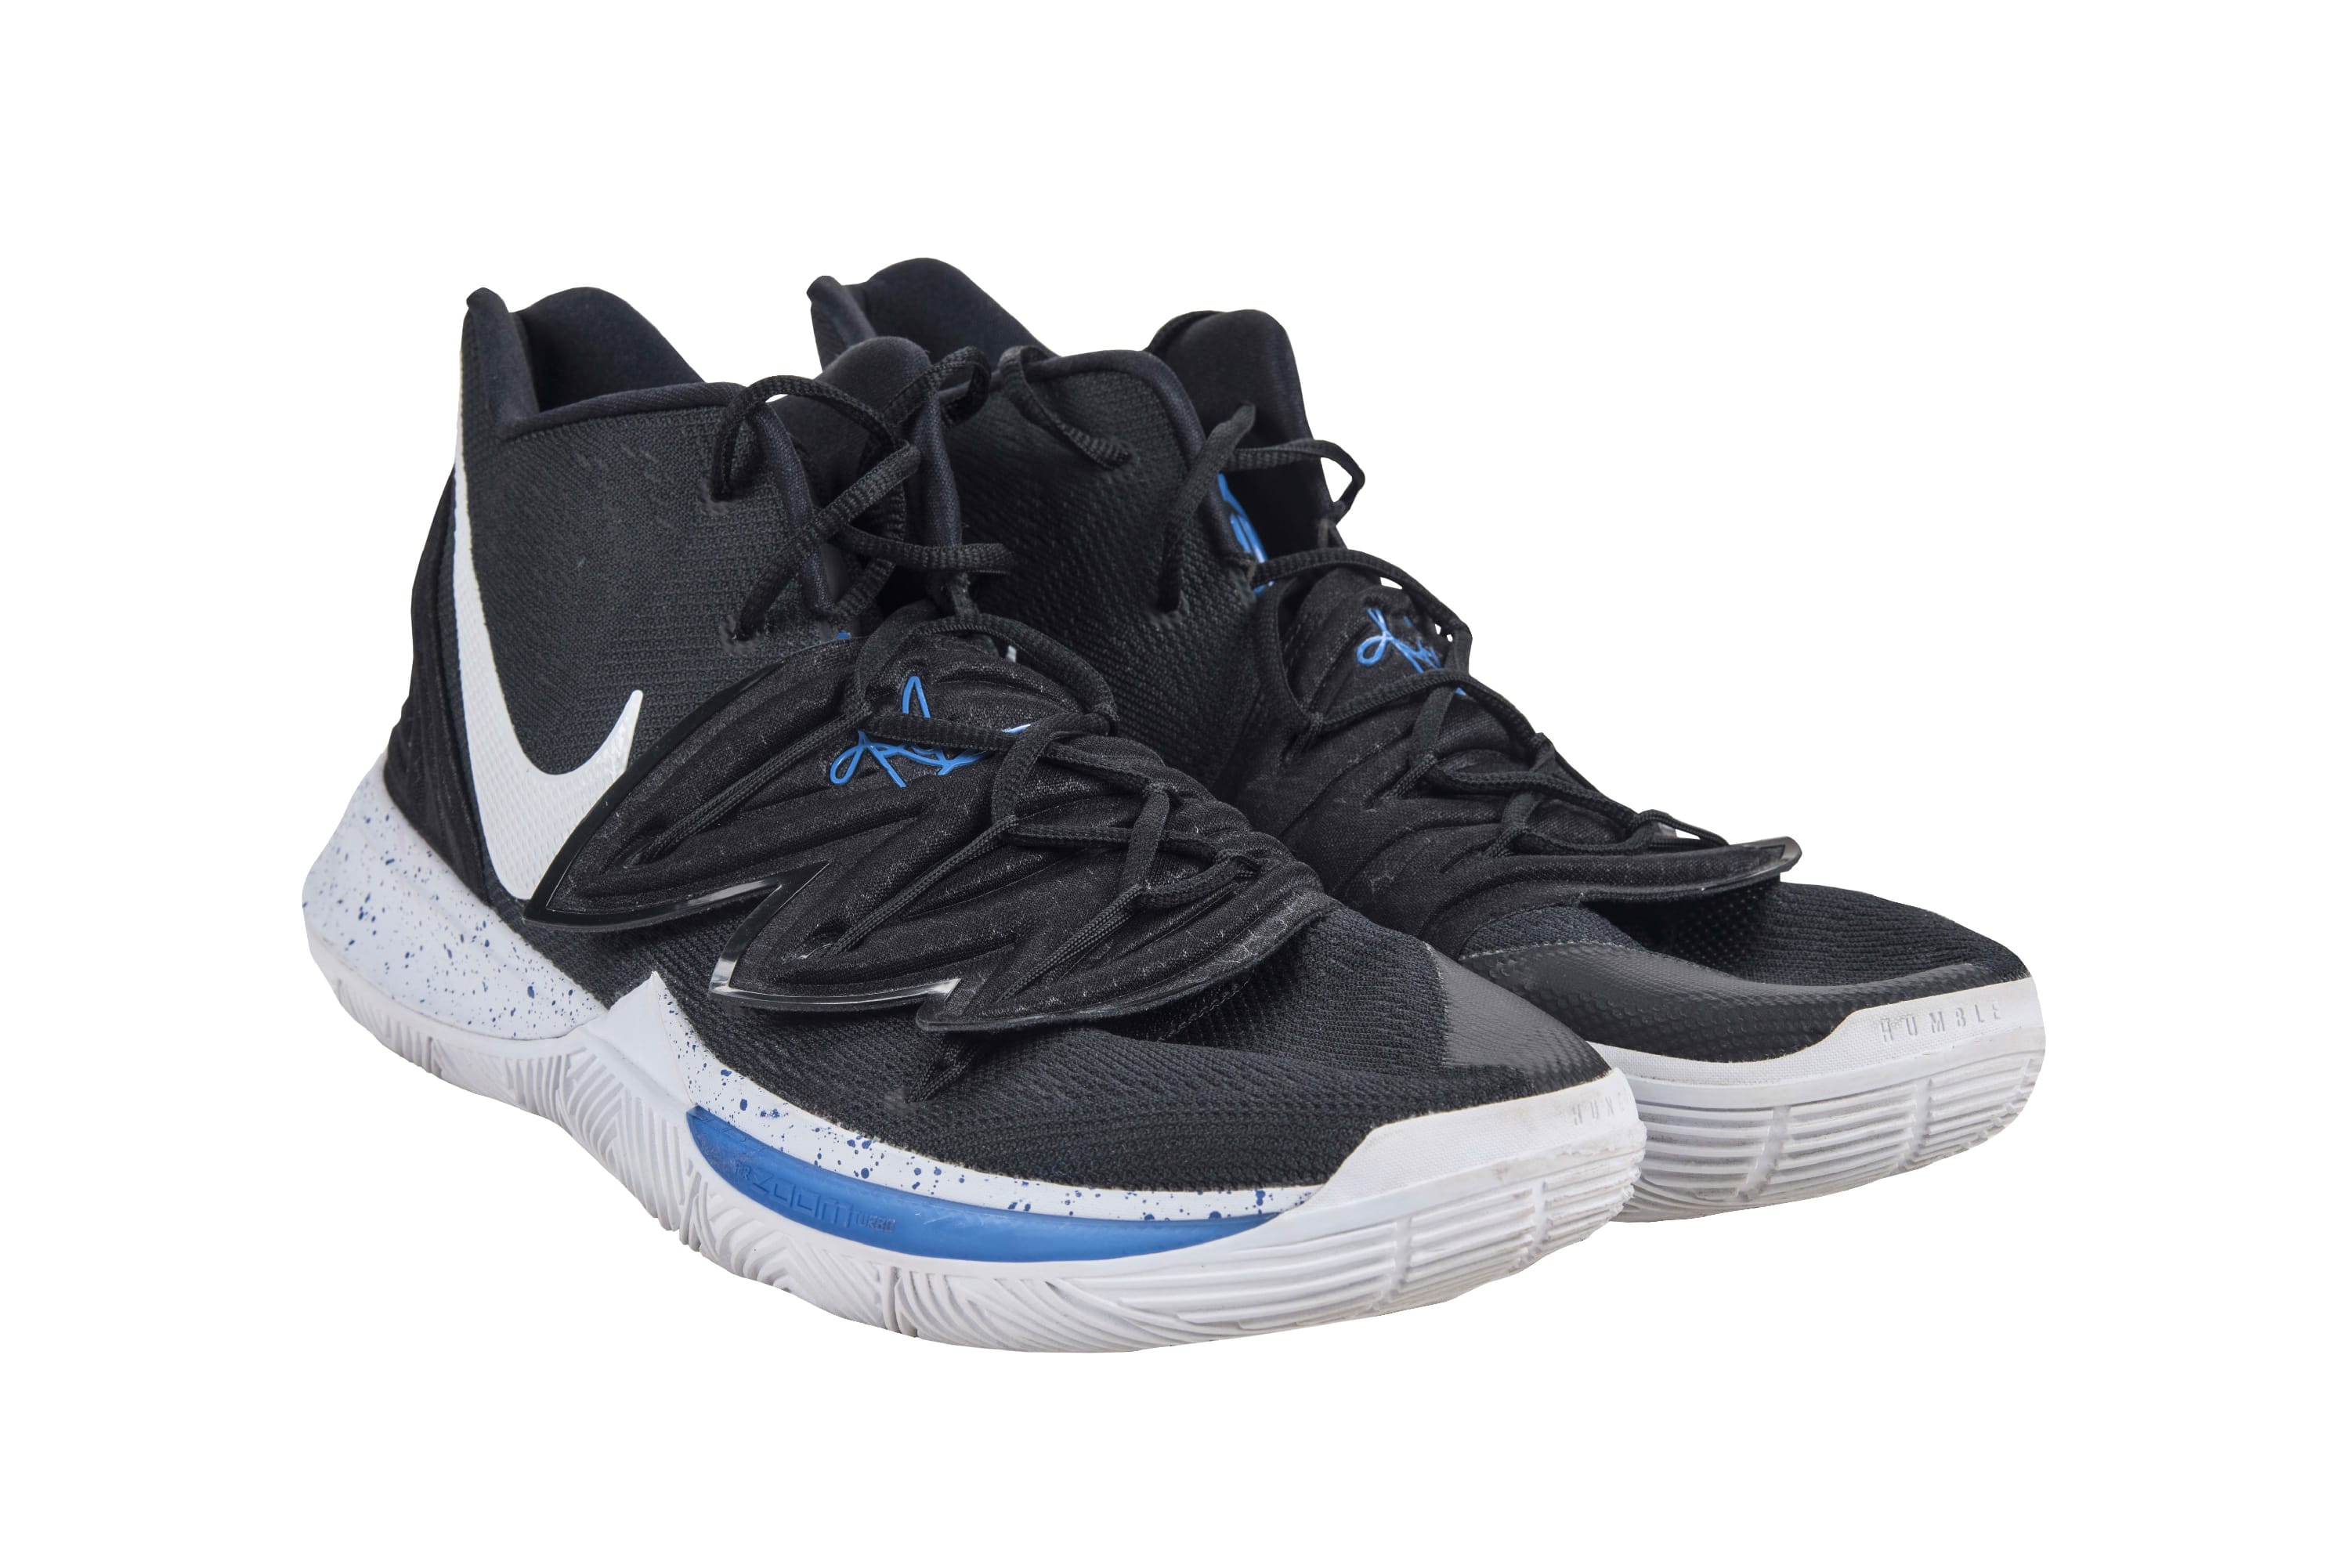 Zion Williamson Kyrie 5 Auctioned for 